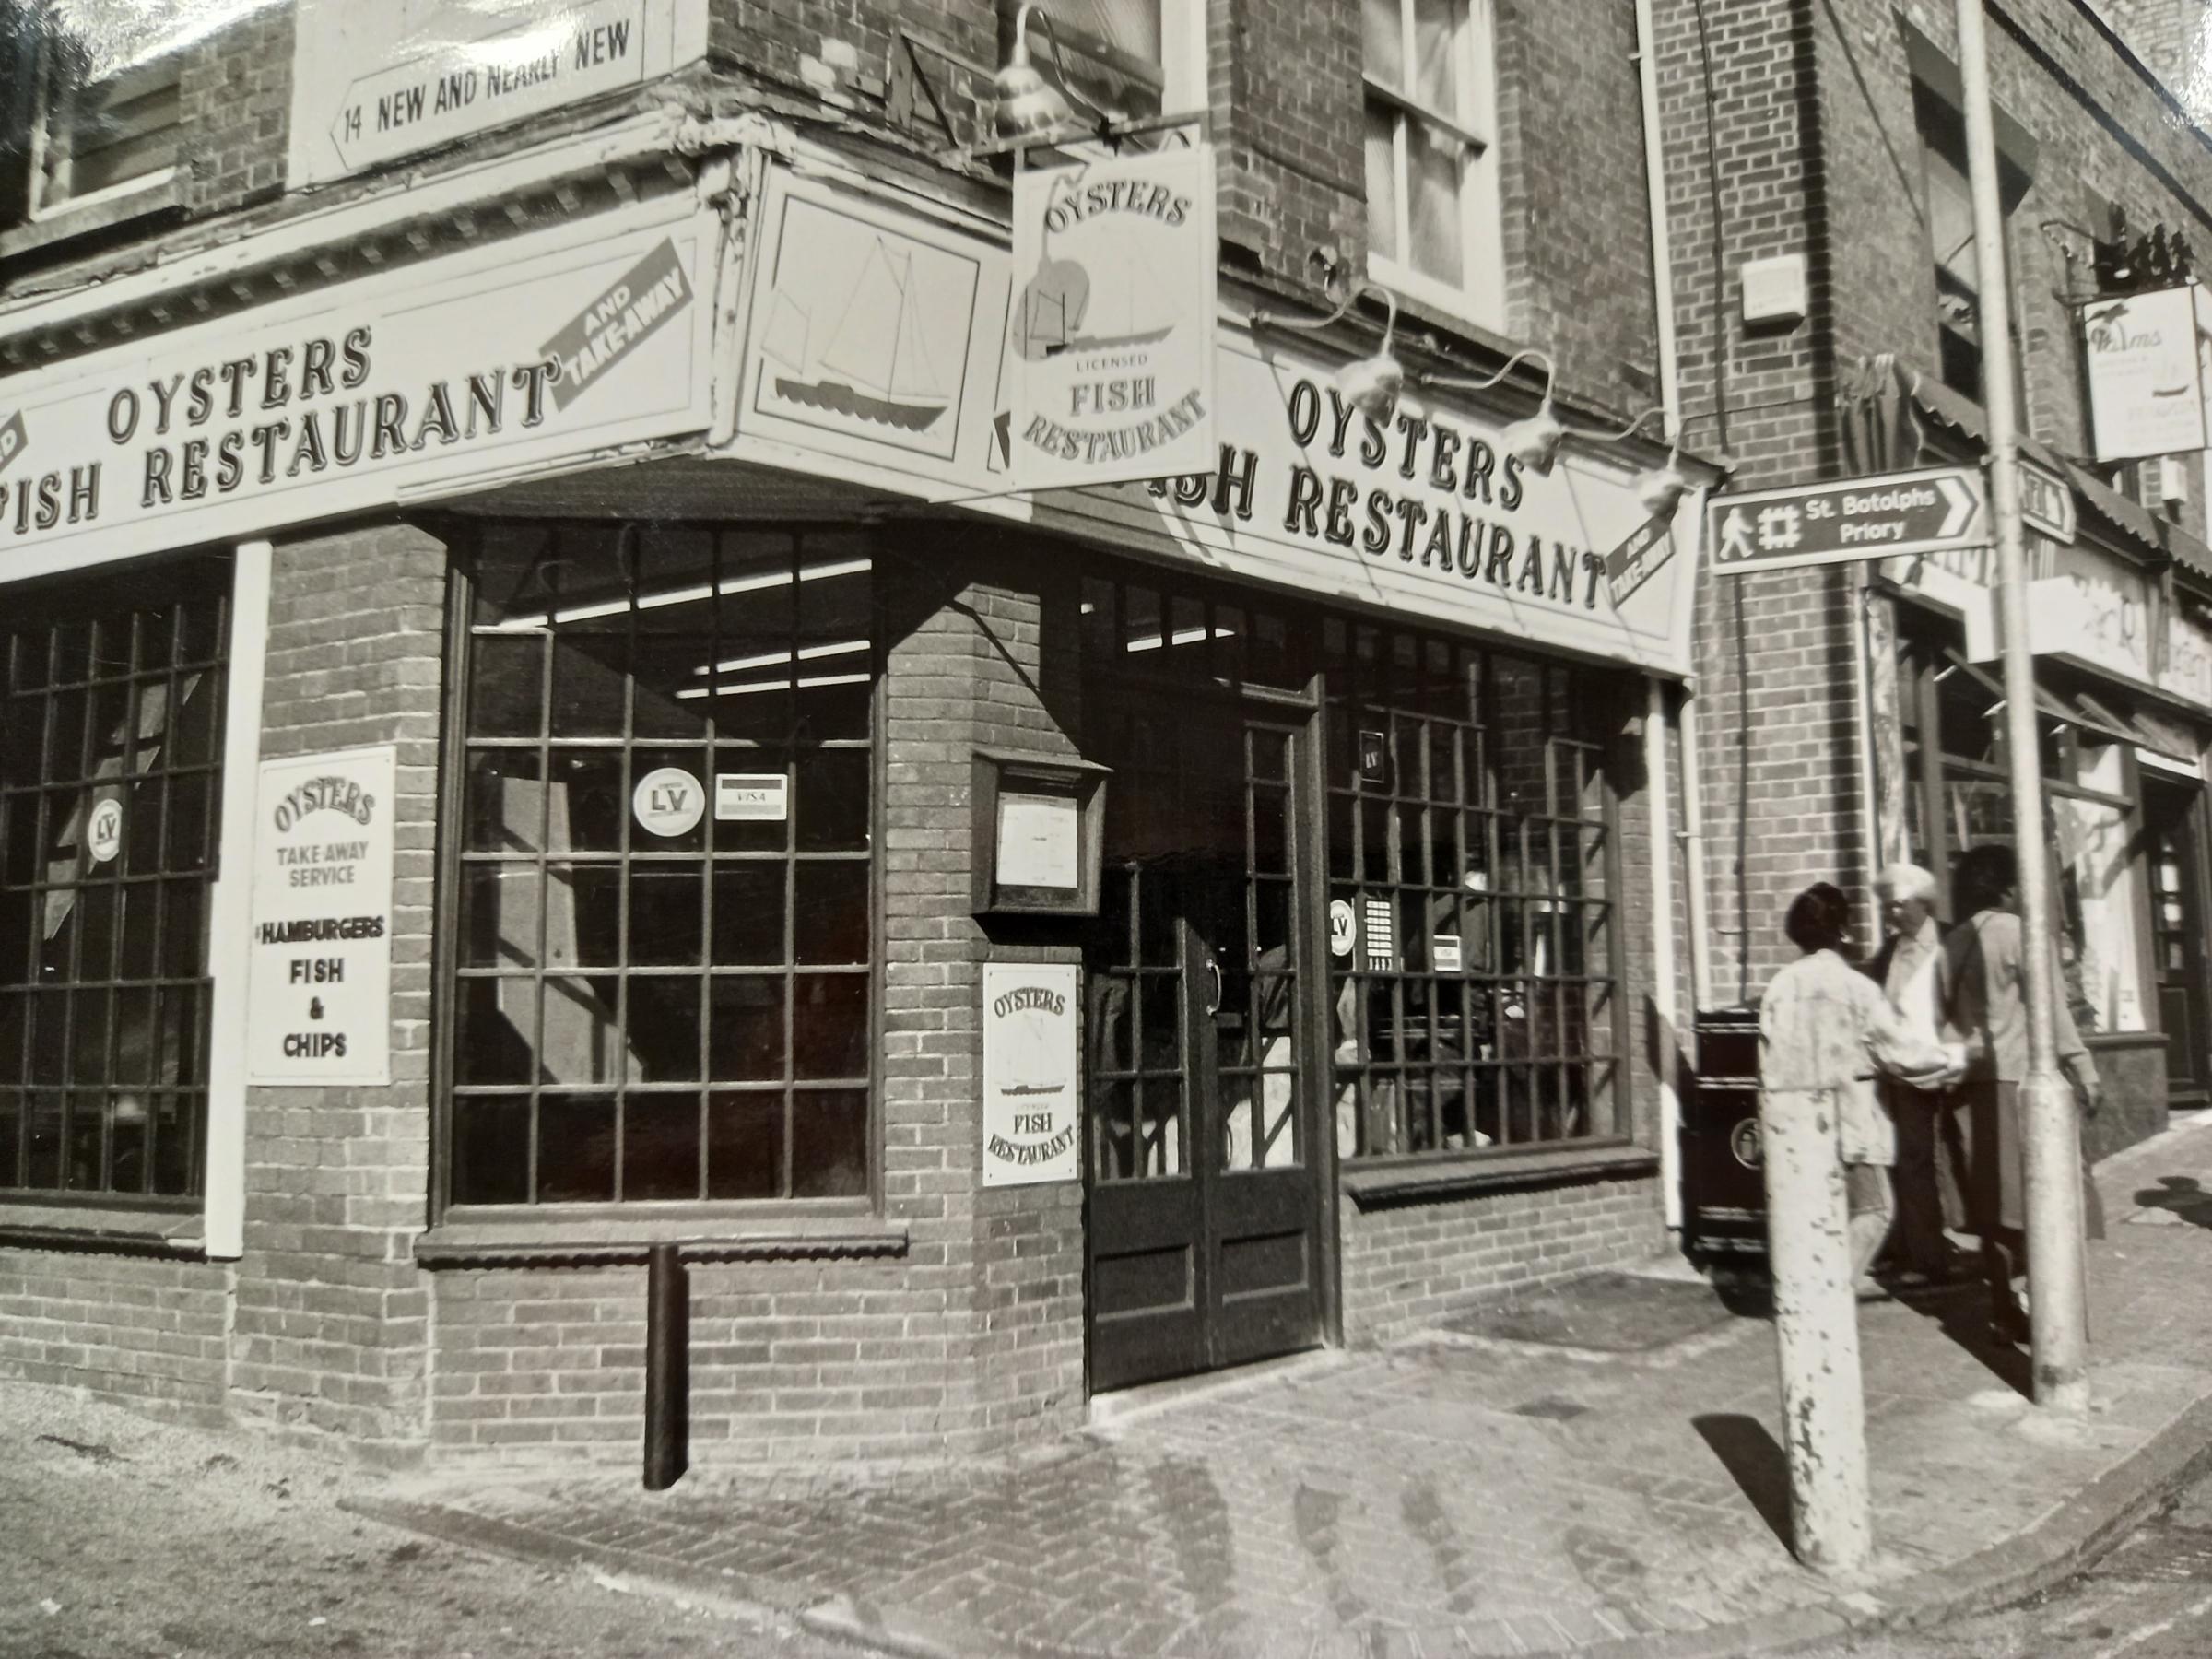 Oysters Fish Restaurant pictured in 1990